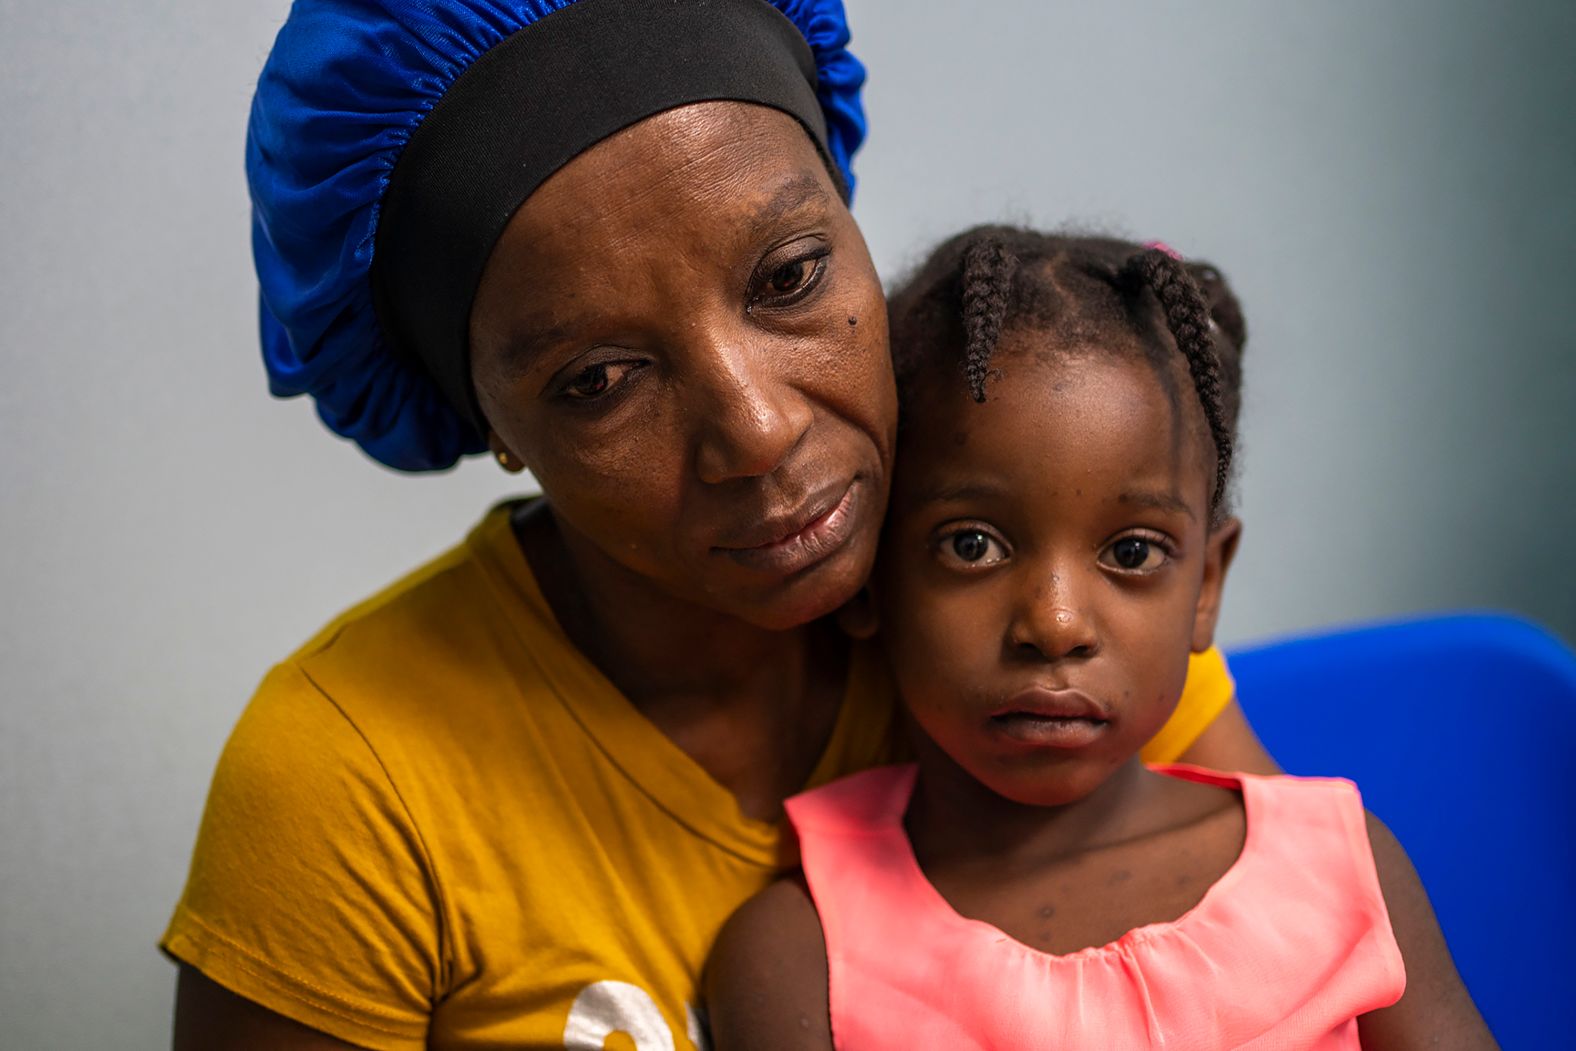 Louicamene Chery and her daughter Marie-Christine Marcelin, 4, wait at Médecins Sans Frontières emergency clinic in Port-au-Prince, Haiti, on Sunday, March 17. Since the start of the month, <a href="https://www.cnn.com/2024/03/18/world/haiti-crisis-militias-battle-intl-latam/index.html" target="_blank">criminal groups have been attacking</a> the last remnants of the Haitian state in the capital city. Typically packed <a href="https://www.cnn.com/2024/03/20/us/haiti-us-citizen-evacuation-flight/index.html" target="_blank">streets of the capital have become ghostlands</a> as residents rarely leave their homes under the threat of violence, CNN crews have reported.